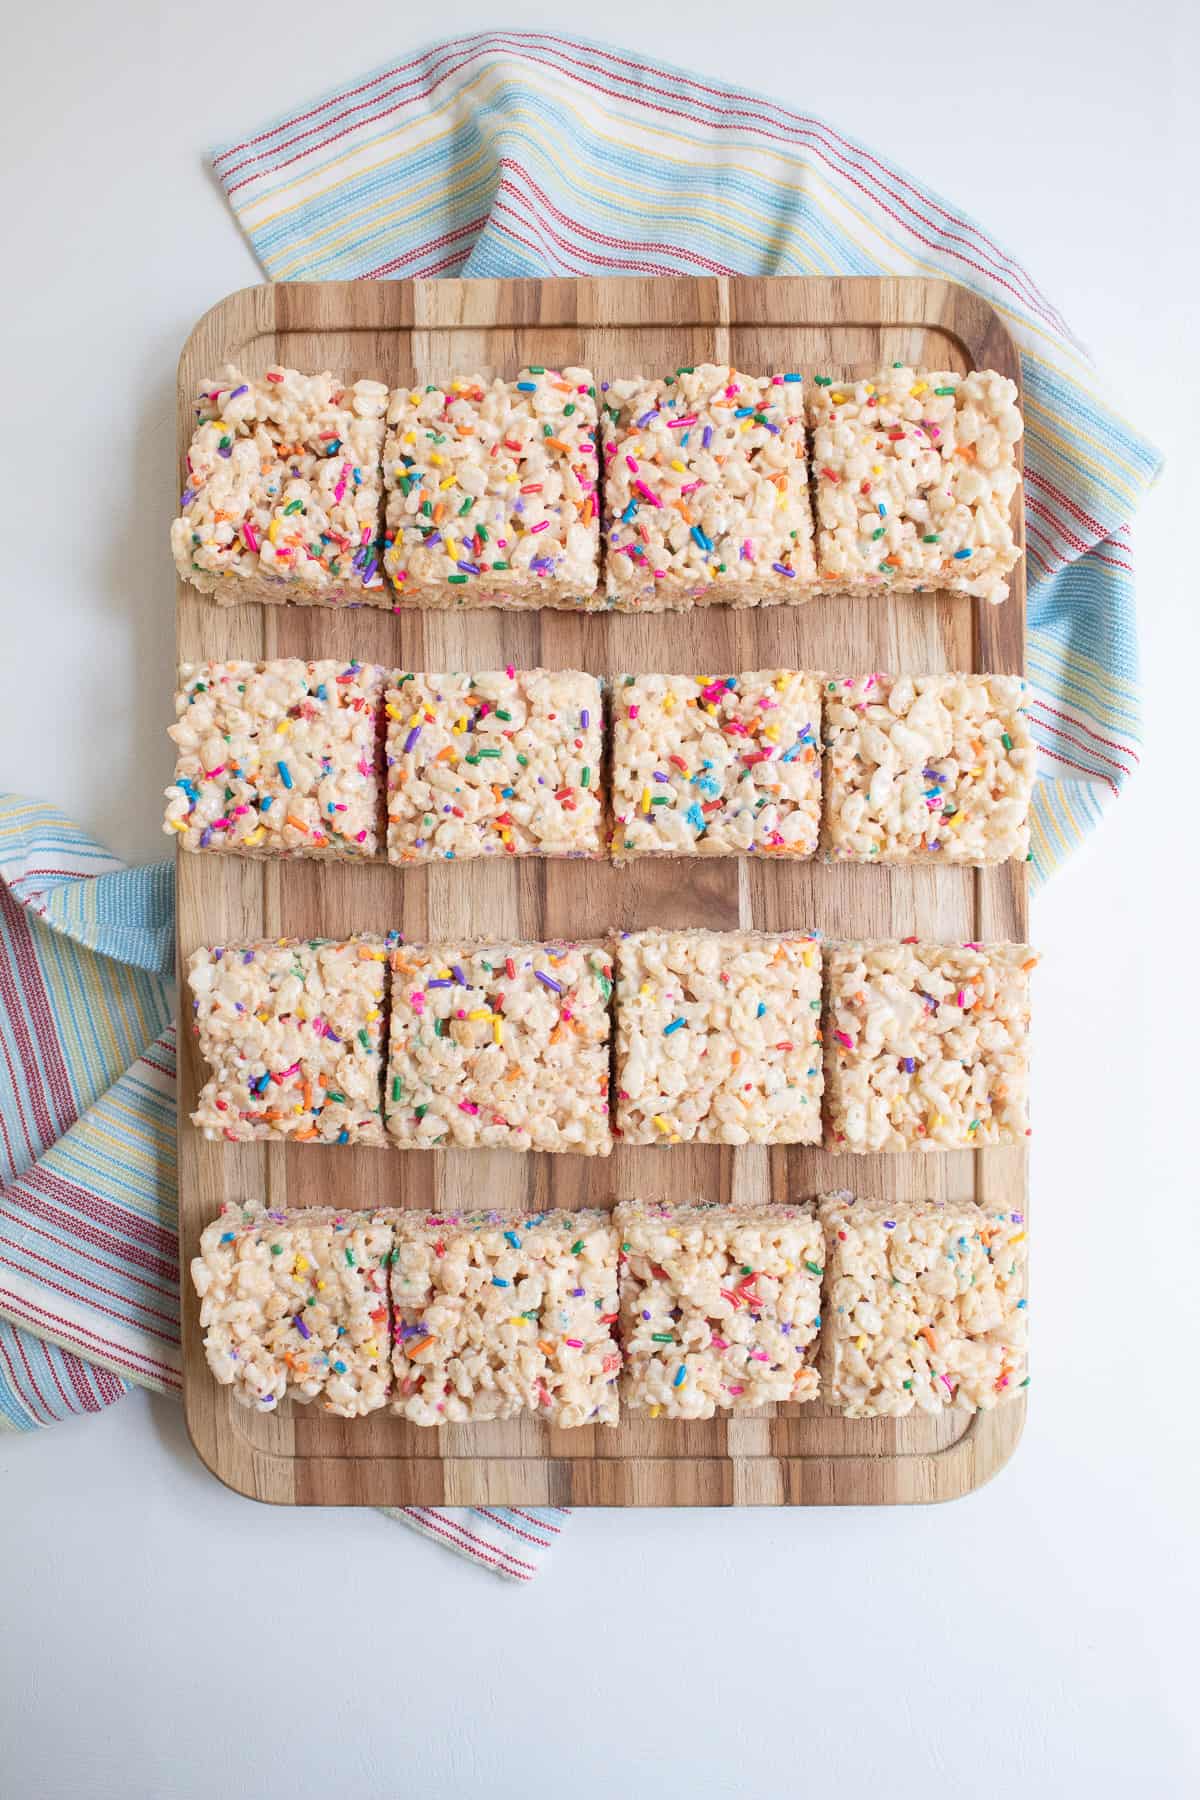 The treats are cut into 16 squares and displayed on a wooden cutting board.